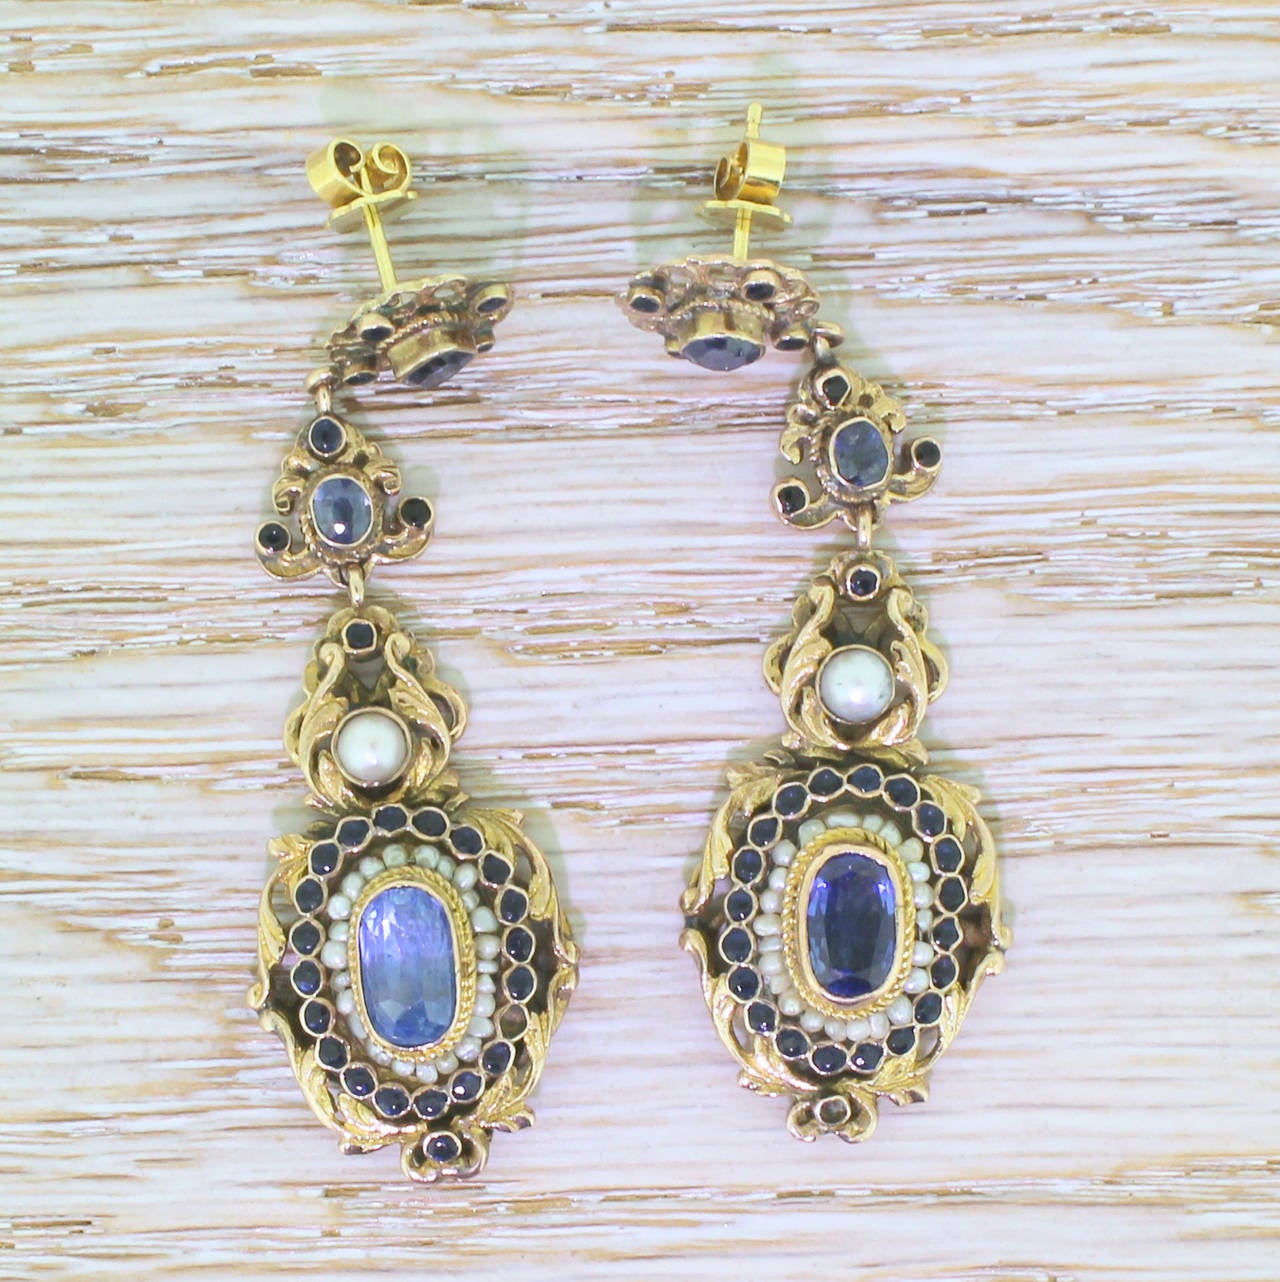 A bold and decorative pair of Austro Hungarian earrings, featuring an estimated total of 6.50 carat of natural, unenhanced blue sapphire and natural seed and one undrilled button pearl. A thrilling and high end example of the neo-renaissance /